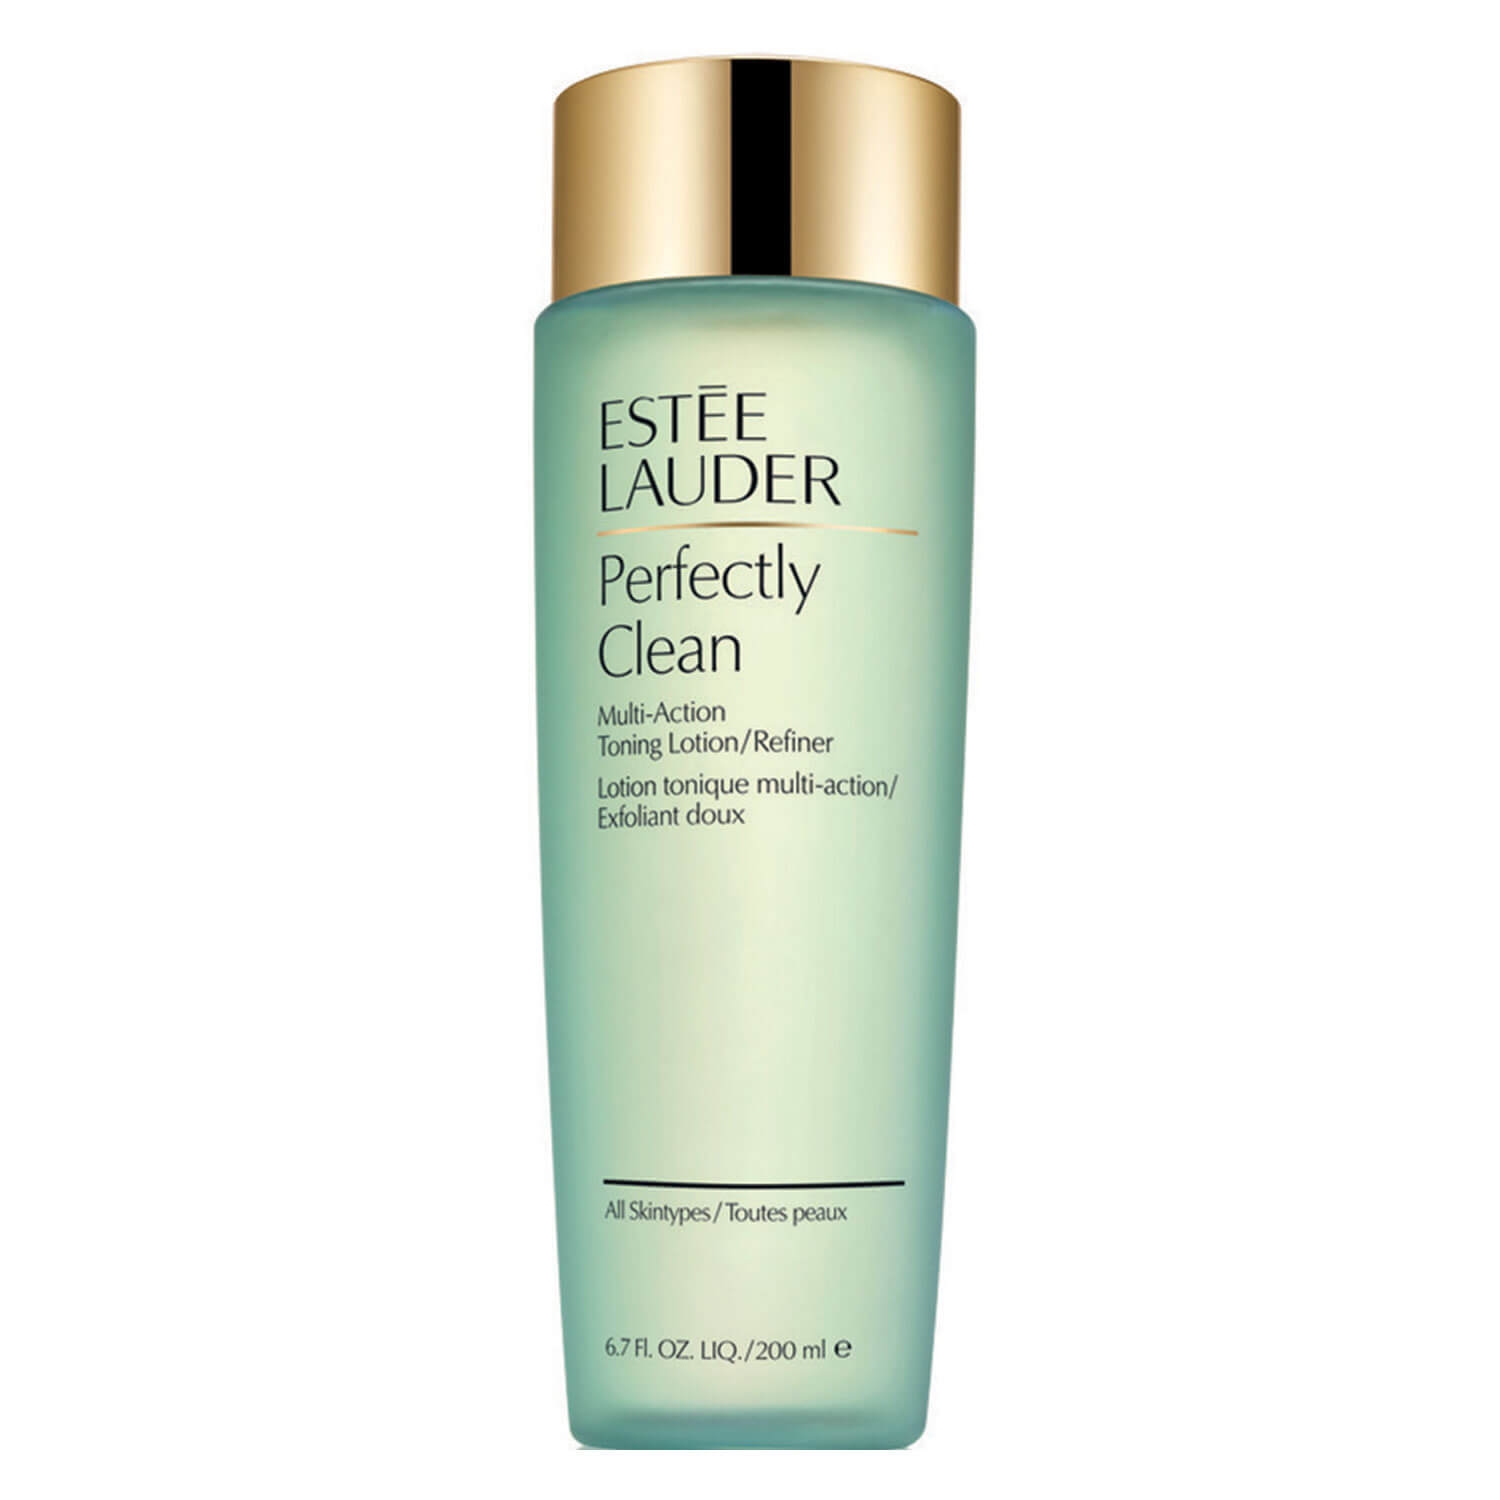 Produktbild von Perfectly Clean - Multi-Action Toning Lotion/Refiner